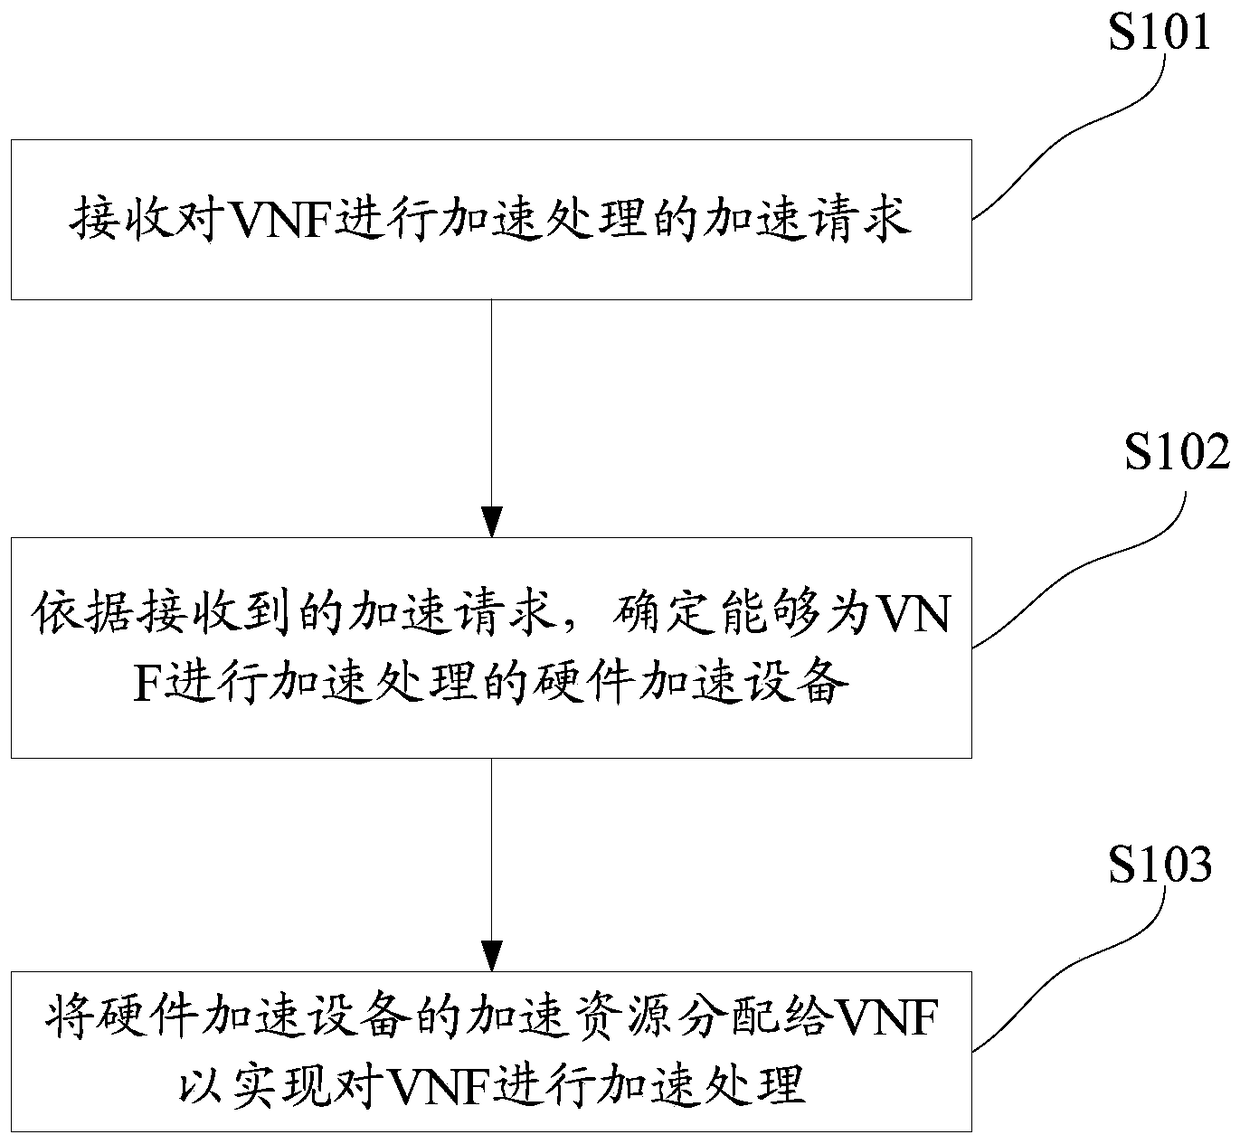 A method and device for accelerating VNF processing